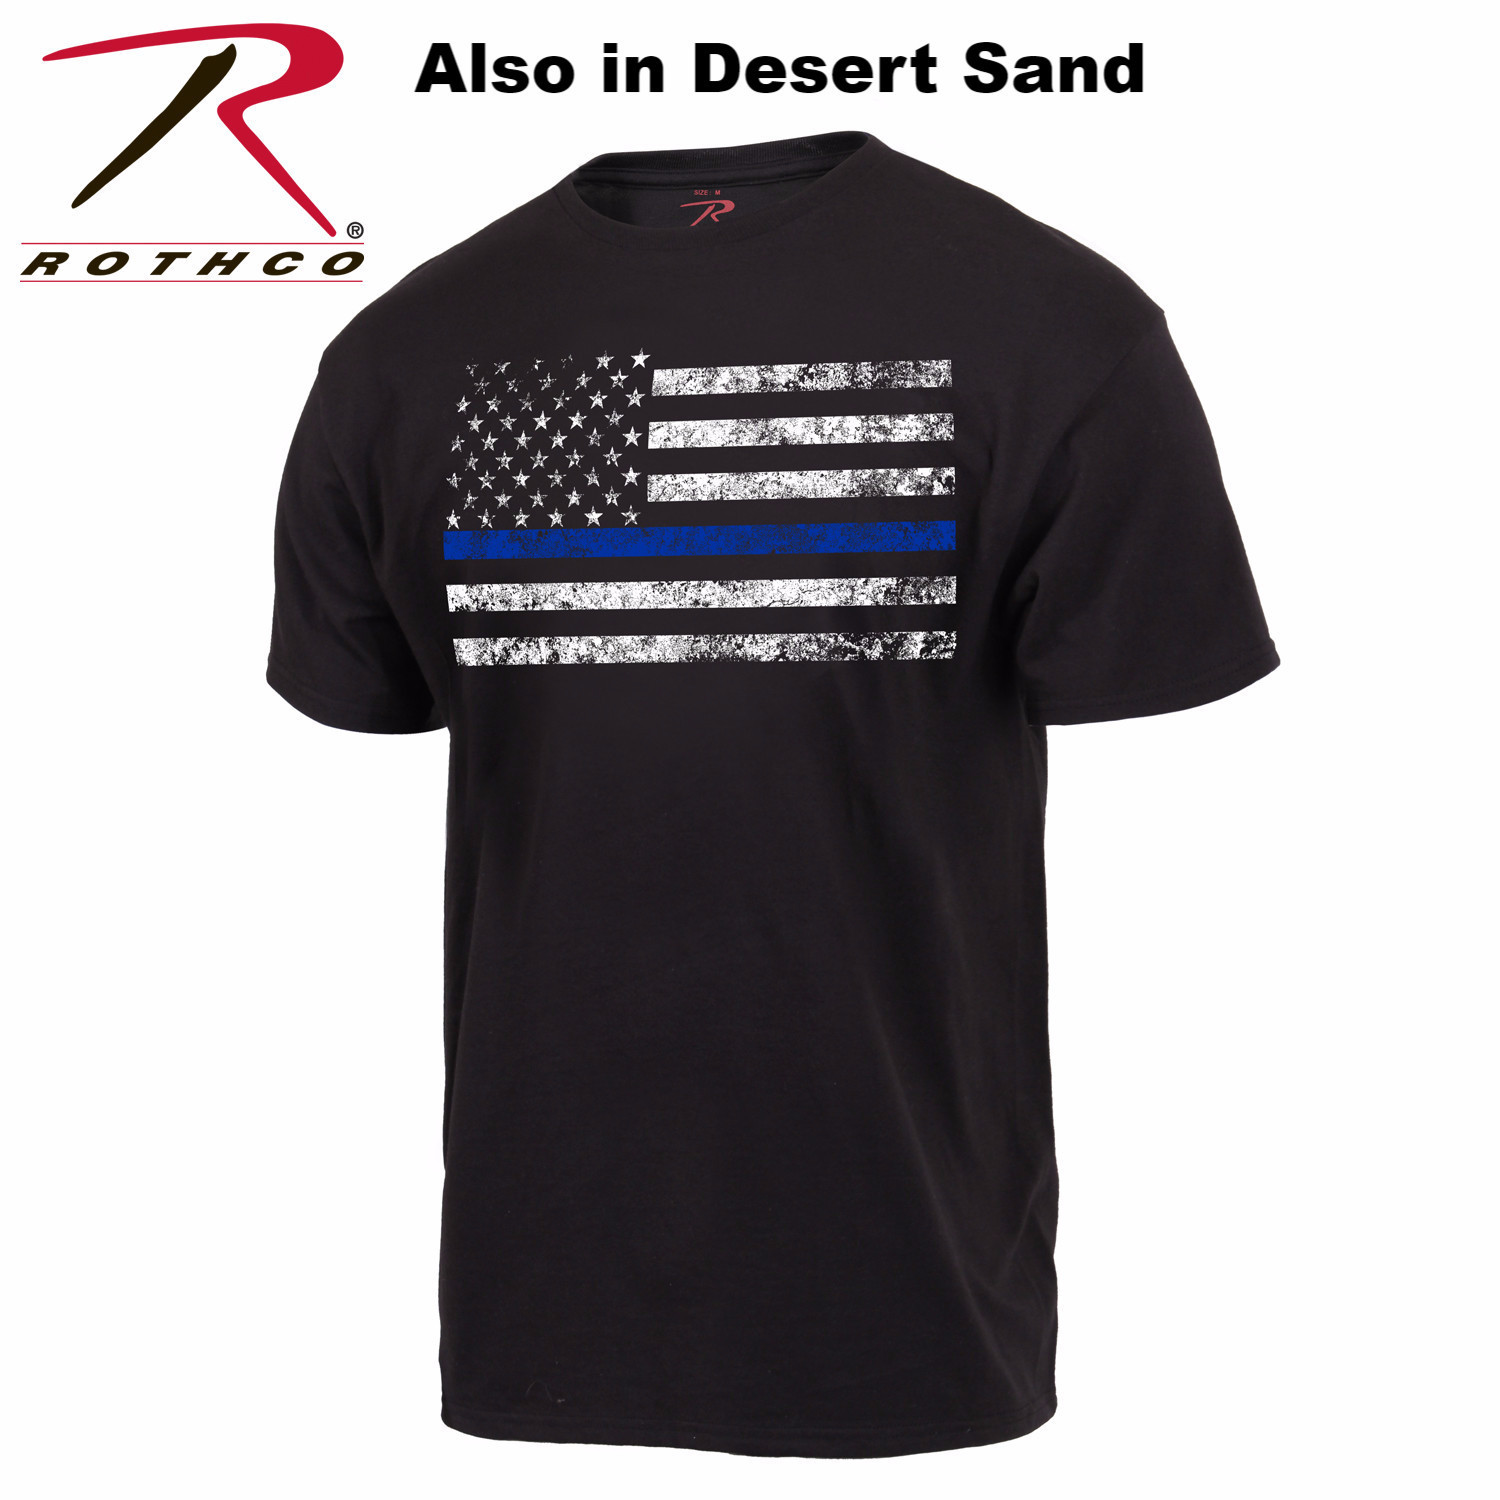 Primary image for Rothco Thin Blue Line T-Shirt